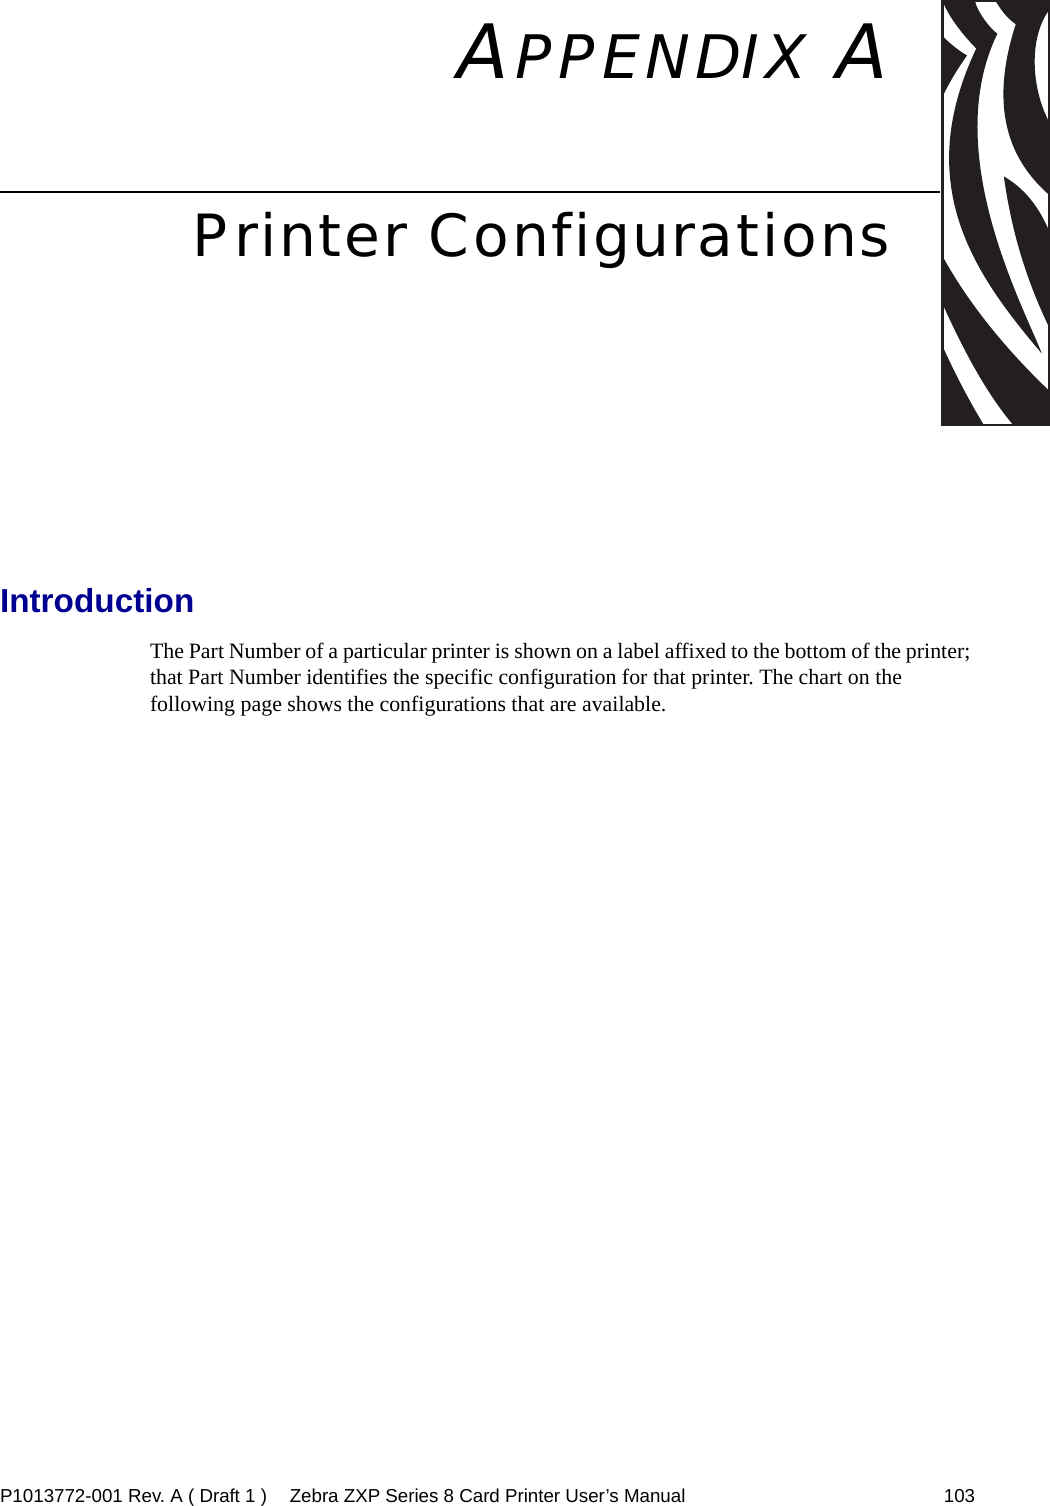 P1013772-001 Rev. A ( Draft 1 ) Zebra ZXP Series 8 Card Printer User’s Manual 103APPENDIX APrinter ConfigurationsIntroductionThe Part Number of a particular printer is shown on a label affixed to the bottom of the printer; that Part Number identifies the specific configuration for that printer. The chart on the following page shows the configurations that are available.